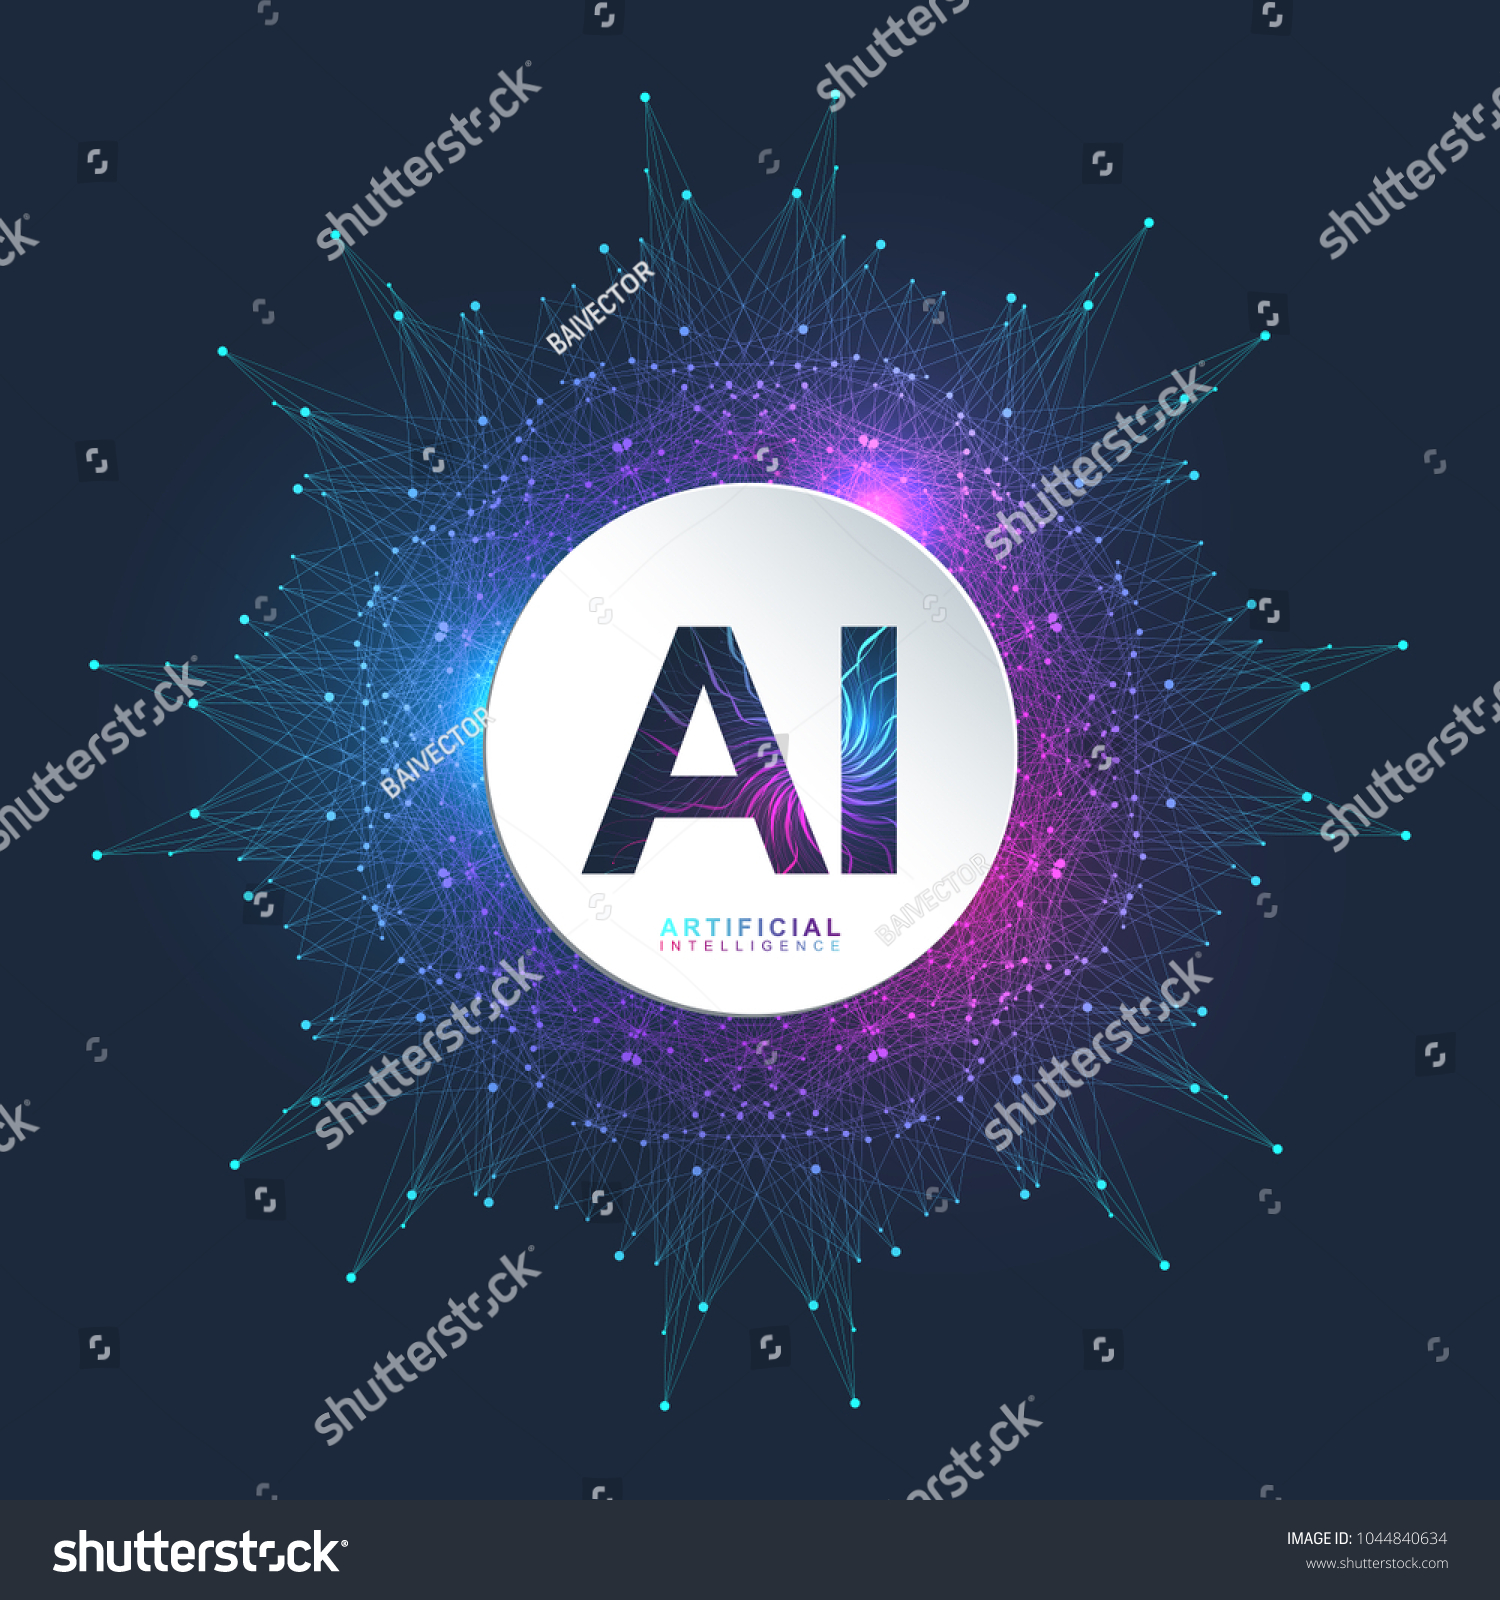 Artificial Intelligence Logo. Artificial Intelligence and Machine Learning Concept. Vector symbol AI. Neural networks and another modern technologies concepts. Technology sci-fi concept #1044840634